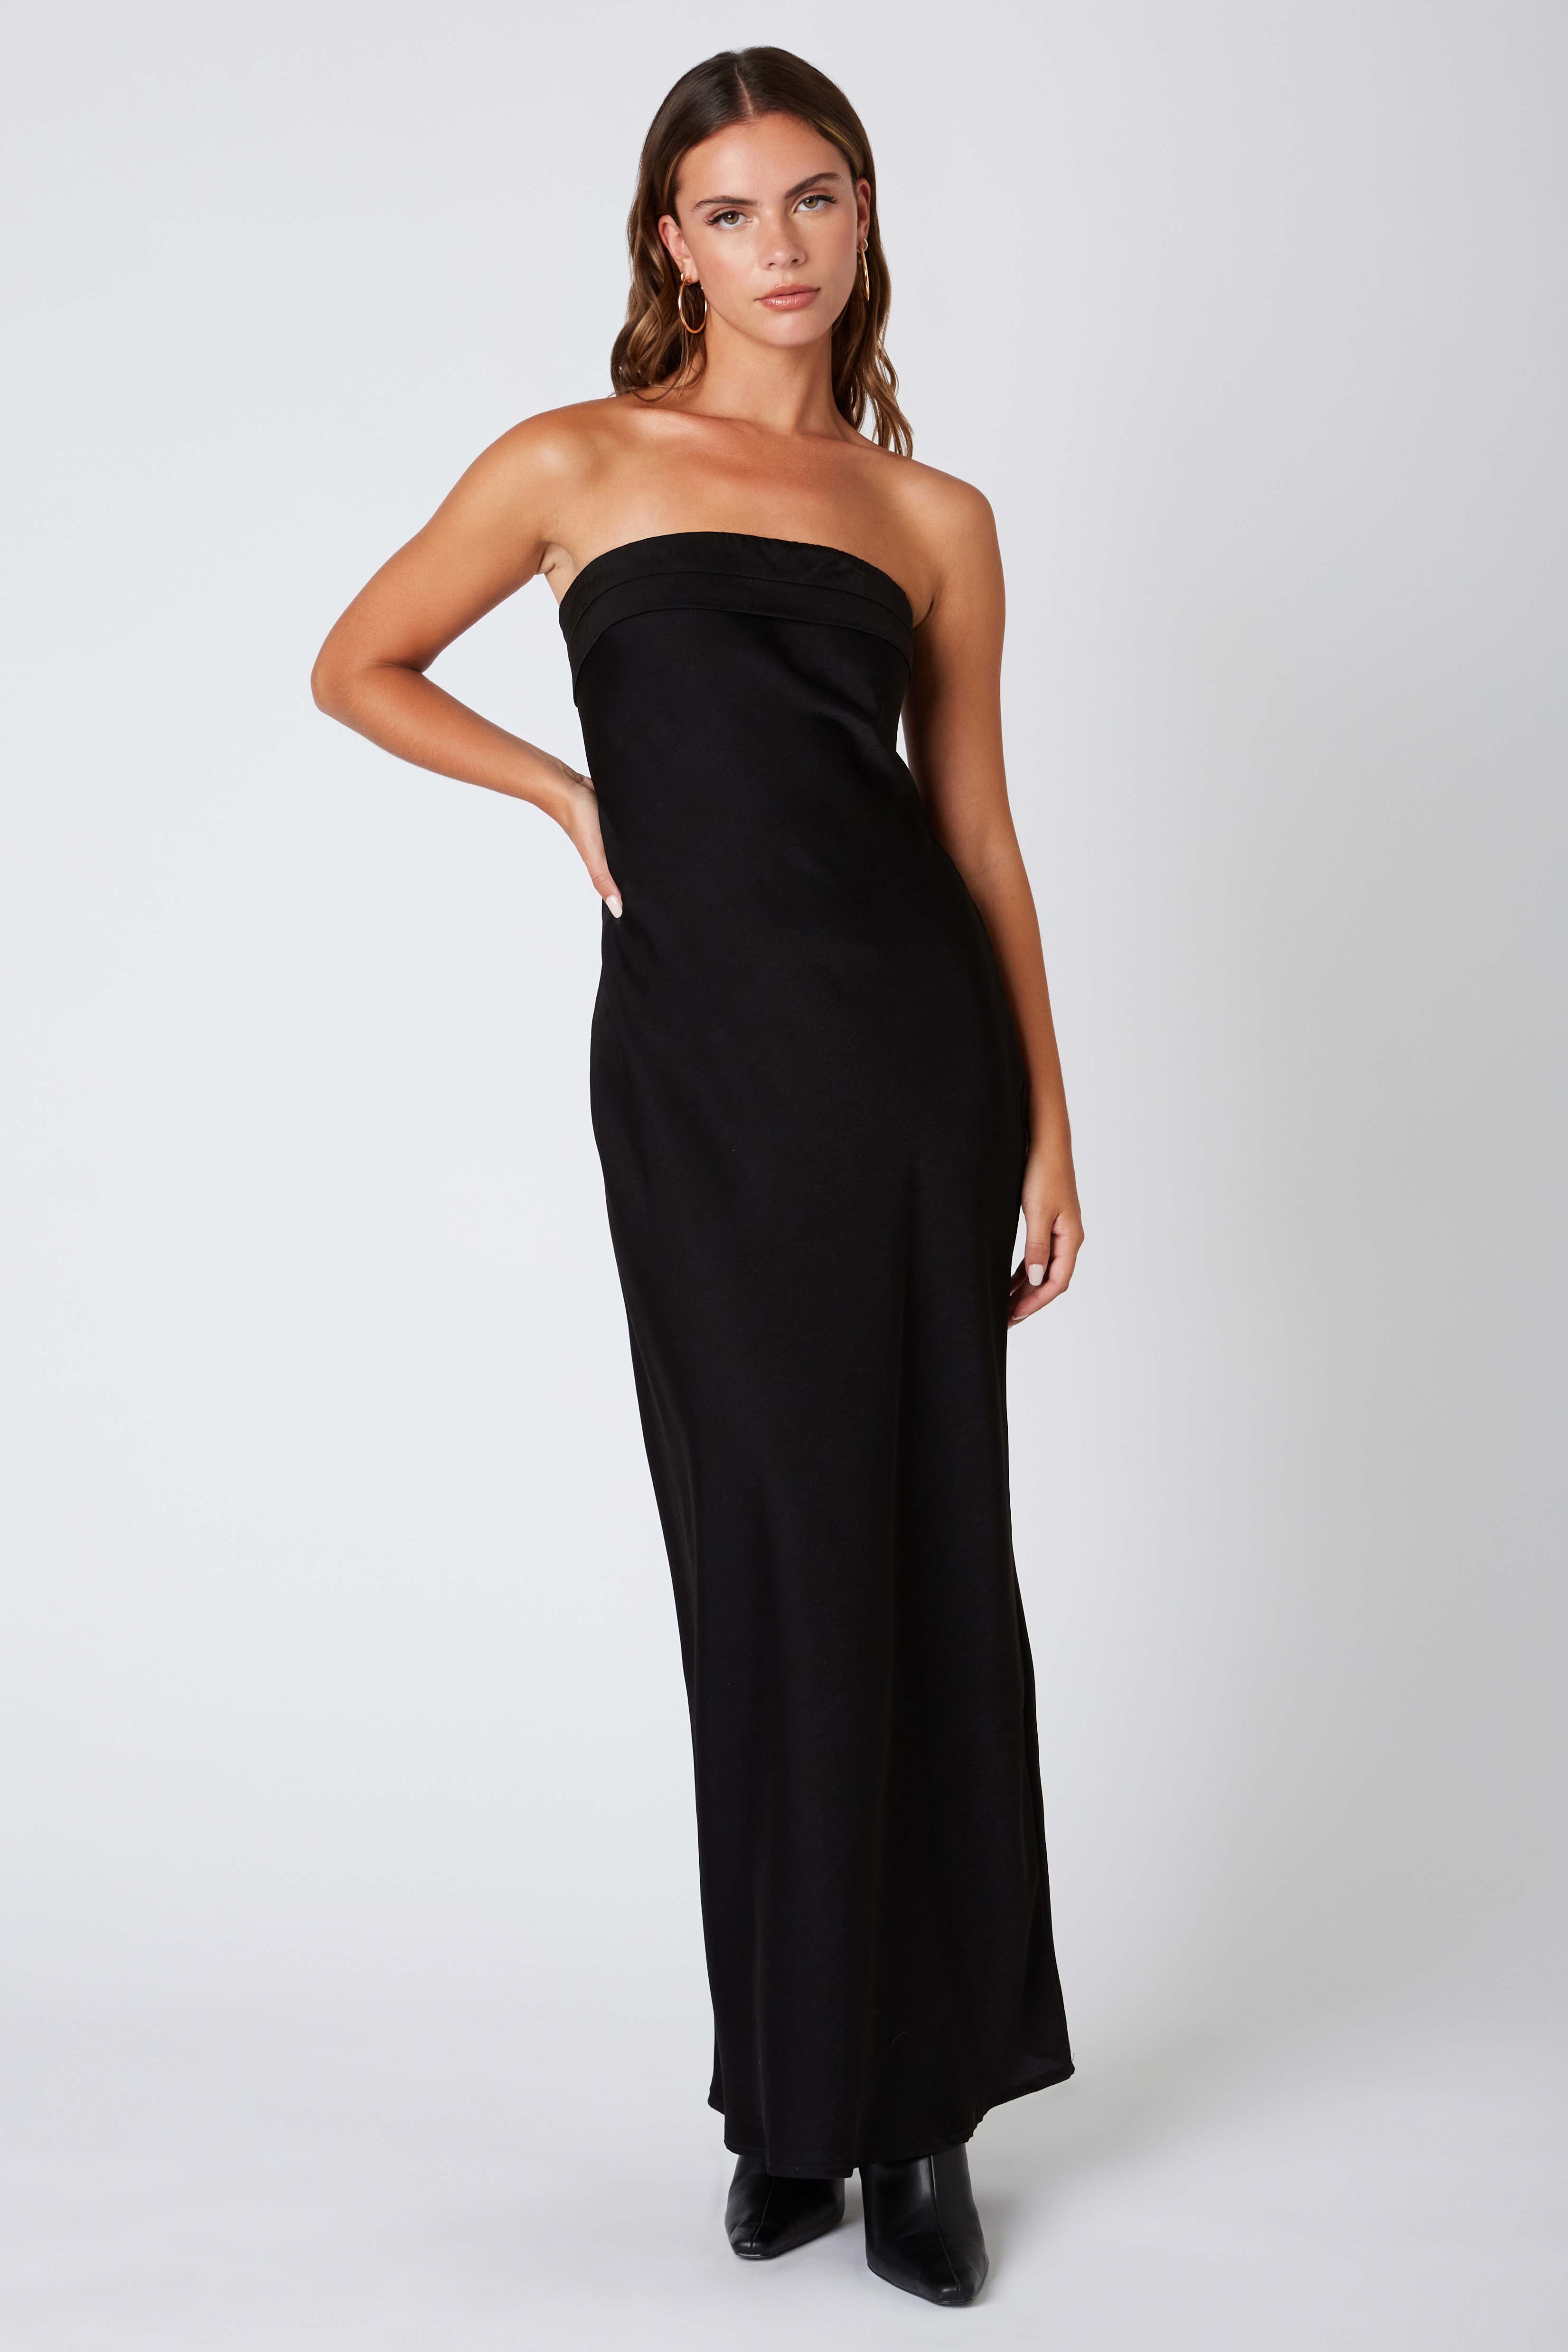 Strapless Bias Gown in Black Front View